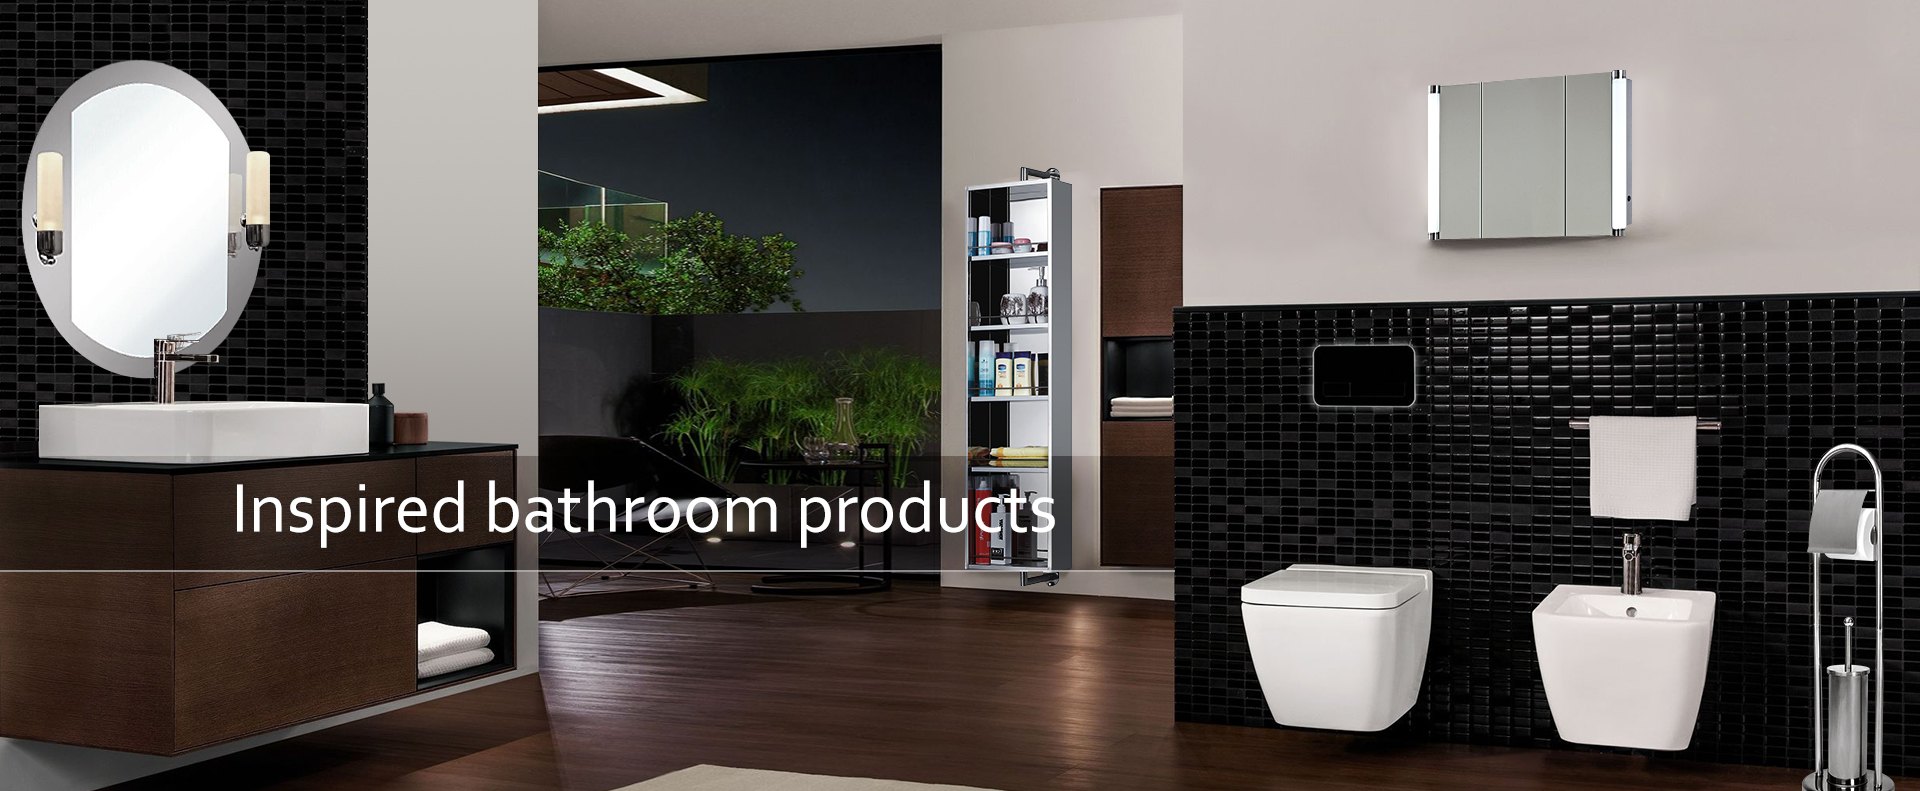 Inspired bathroom products